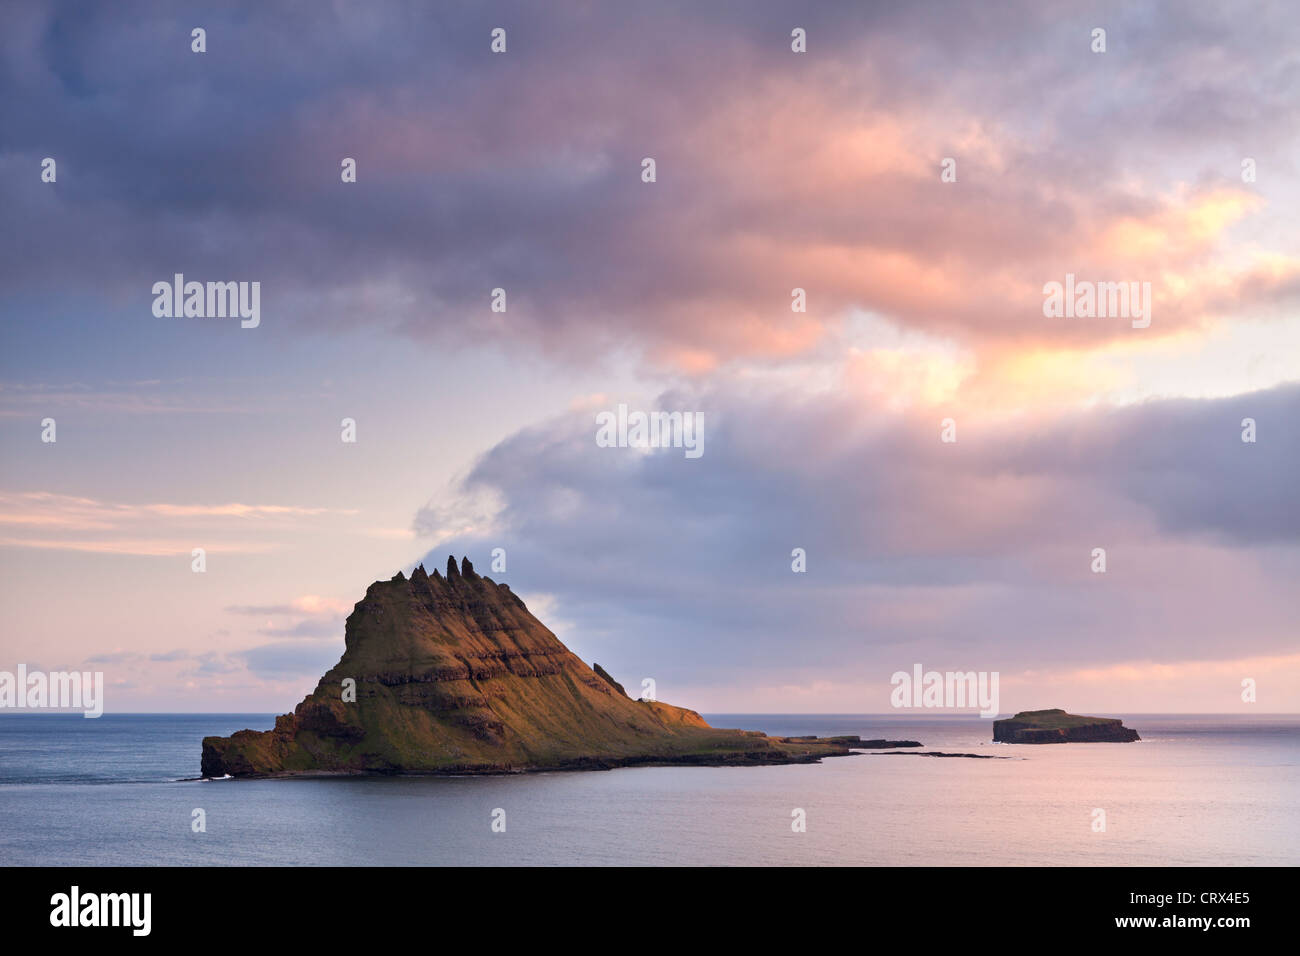 The islet of Tindholmur at the mouth of Sorvagsfjordur, Vagar Island, Faroes Islands. Spring (June) 2012. Stock Photo